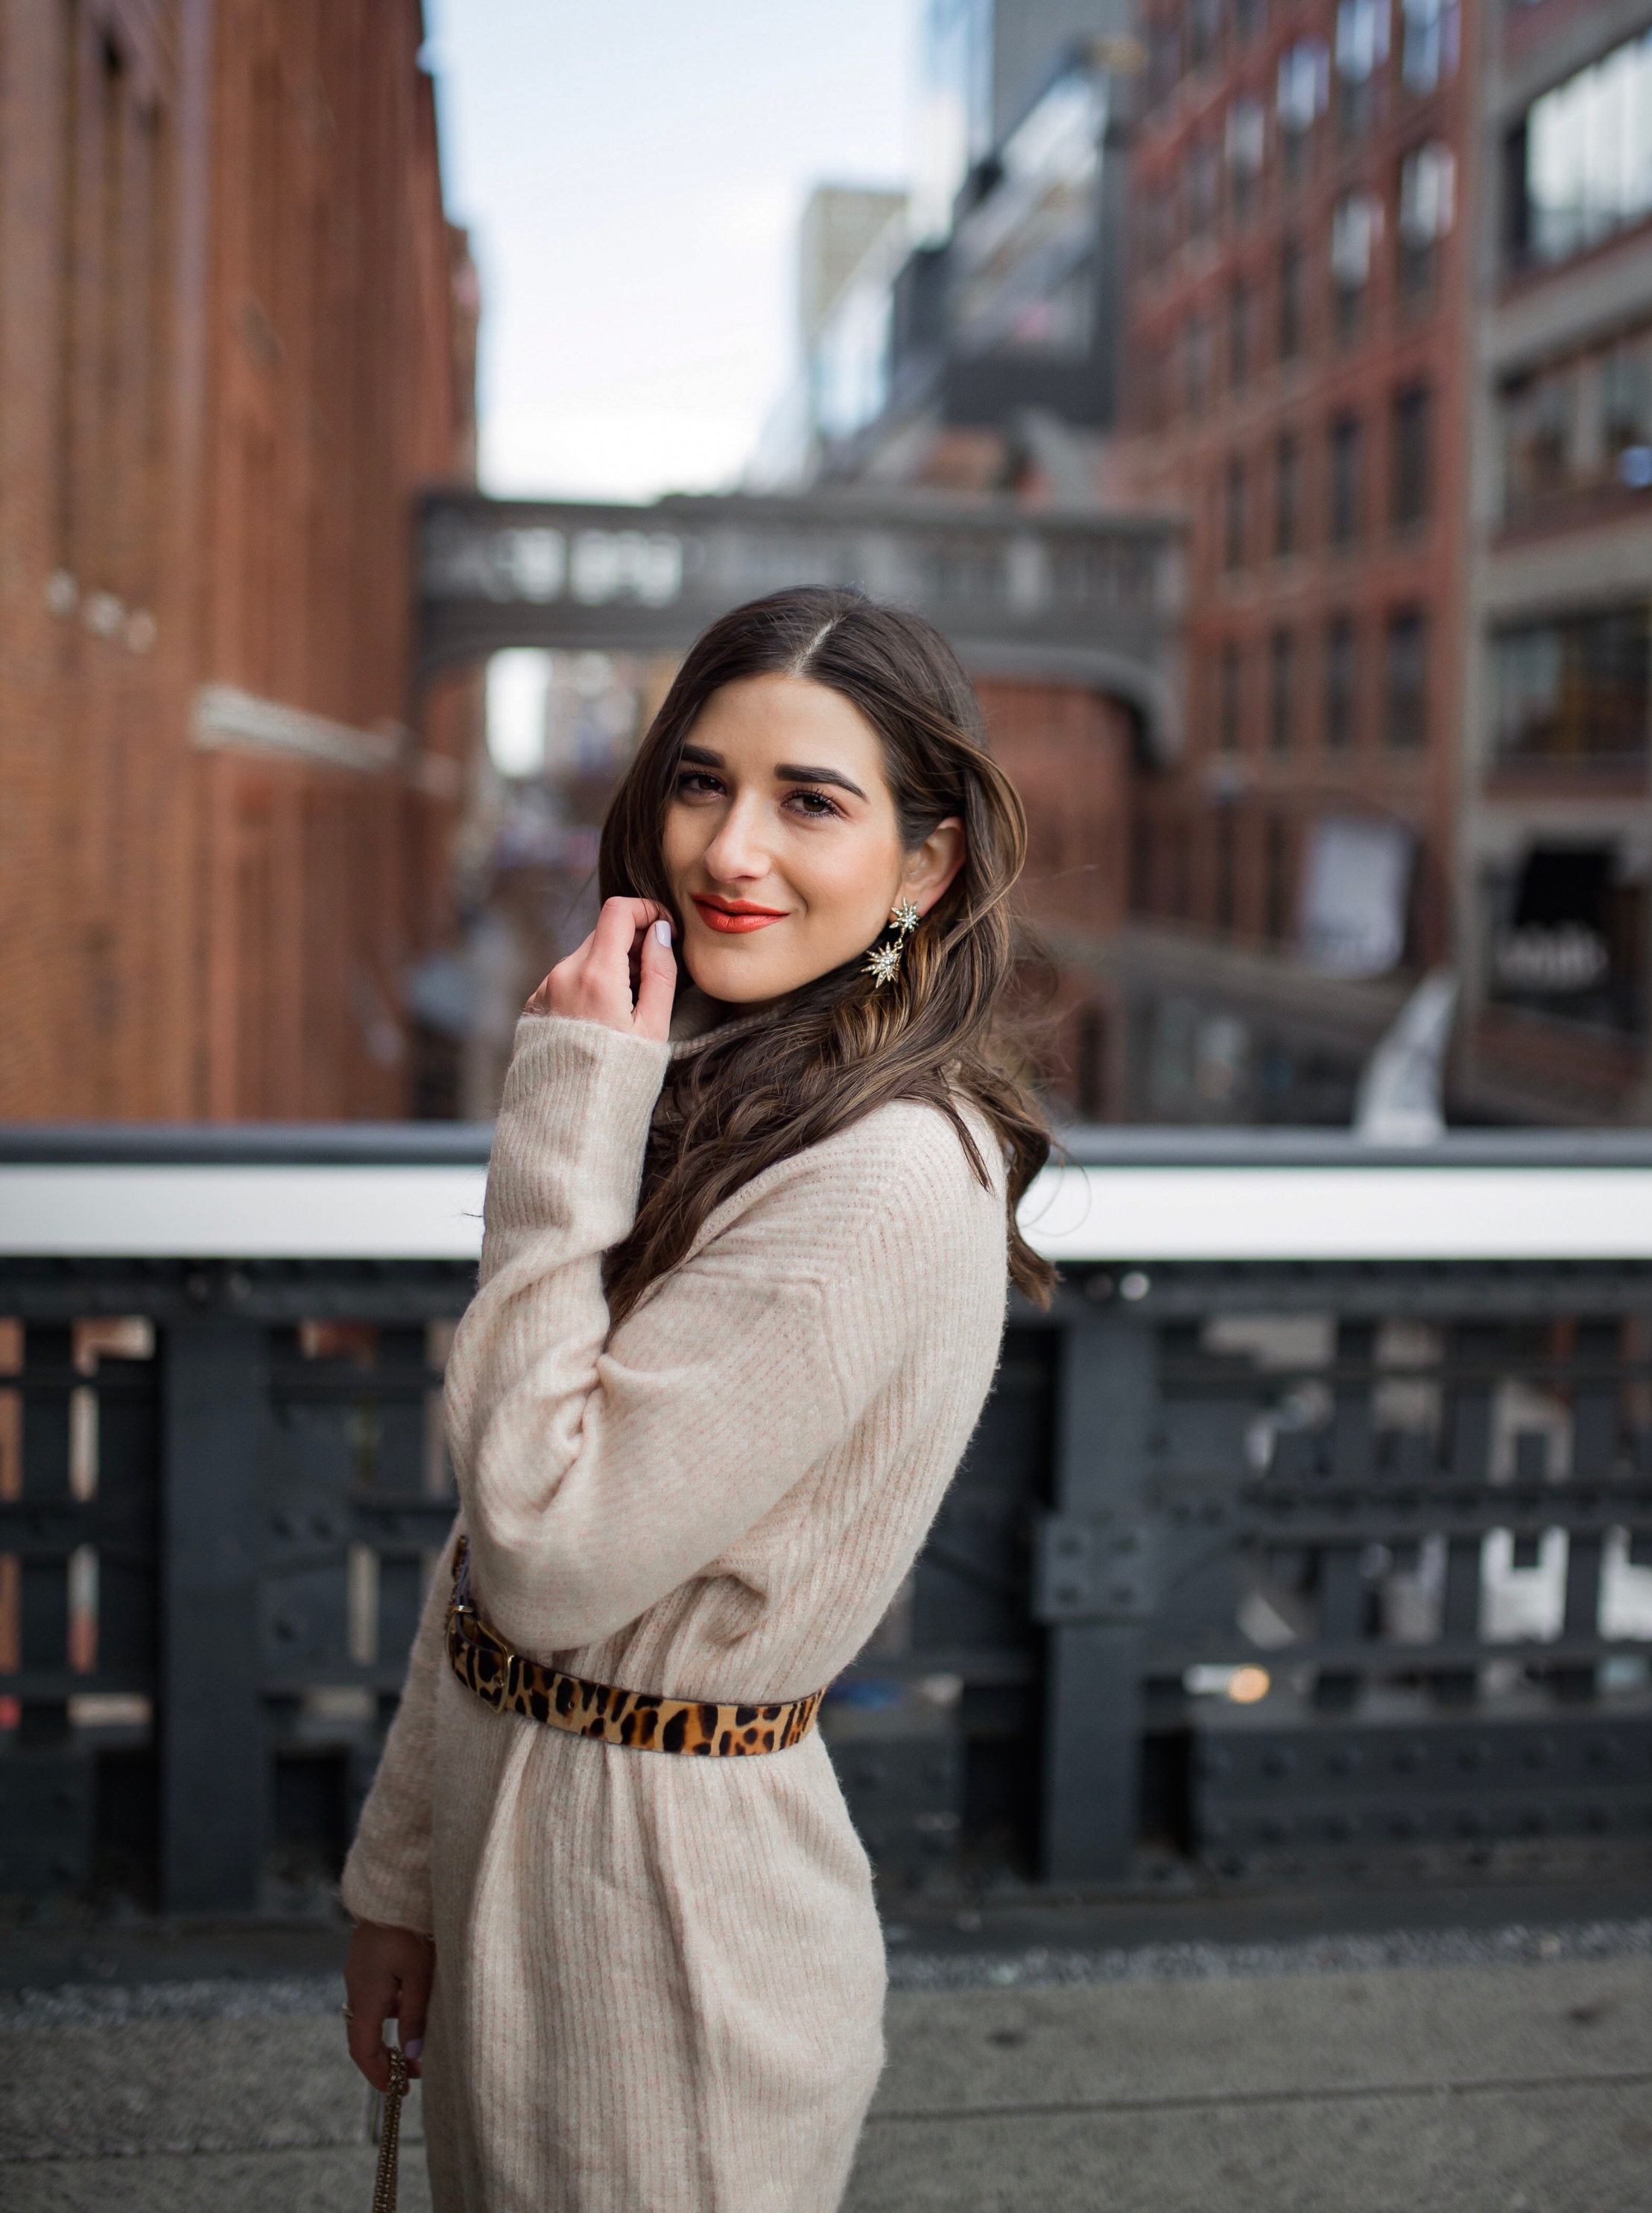 Why Blogging Is Far From Freeloading Beige Sweater Dress White Booties Esther Santer Fashion Blog NYC Street Style Blogger Outfit OOTD Trendy Shopping Leopard Belt Neutral Winter How To Wear Shop Sale Mango Jcrew Inspiration The High Line  Photoshoot.jpg